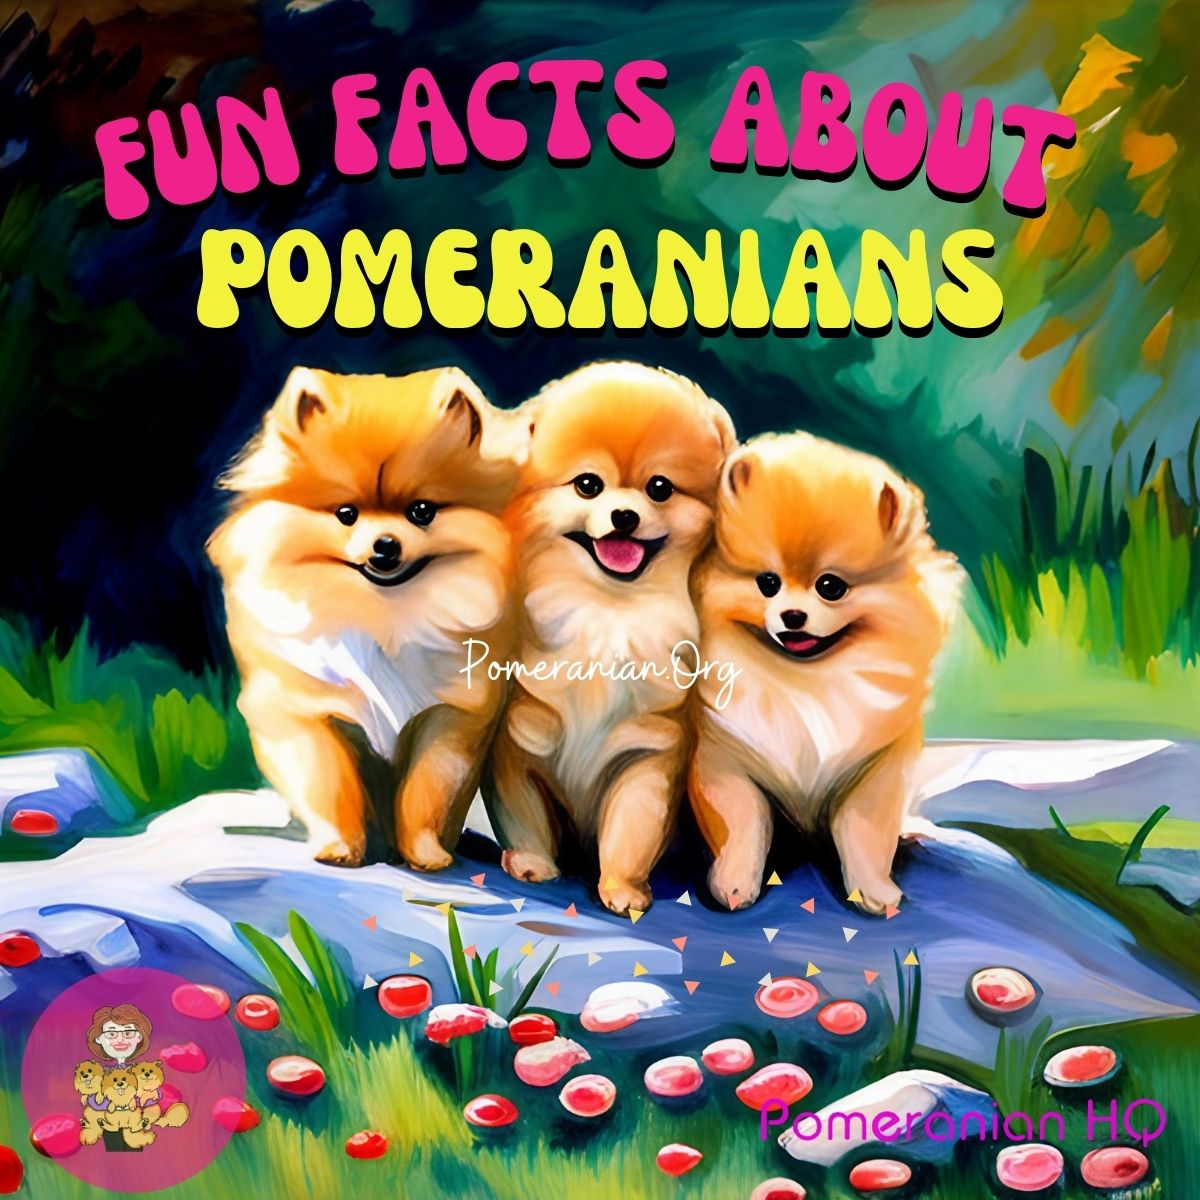 Fun Facts About Pomeranians